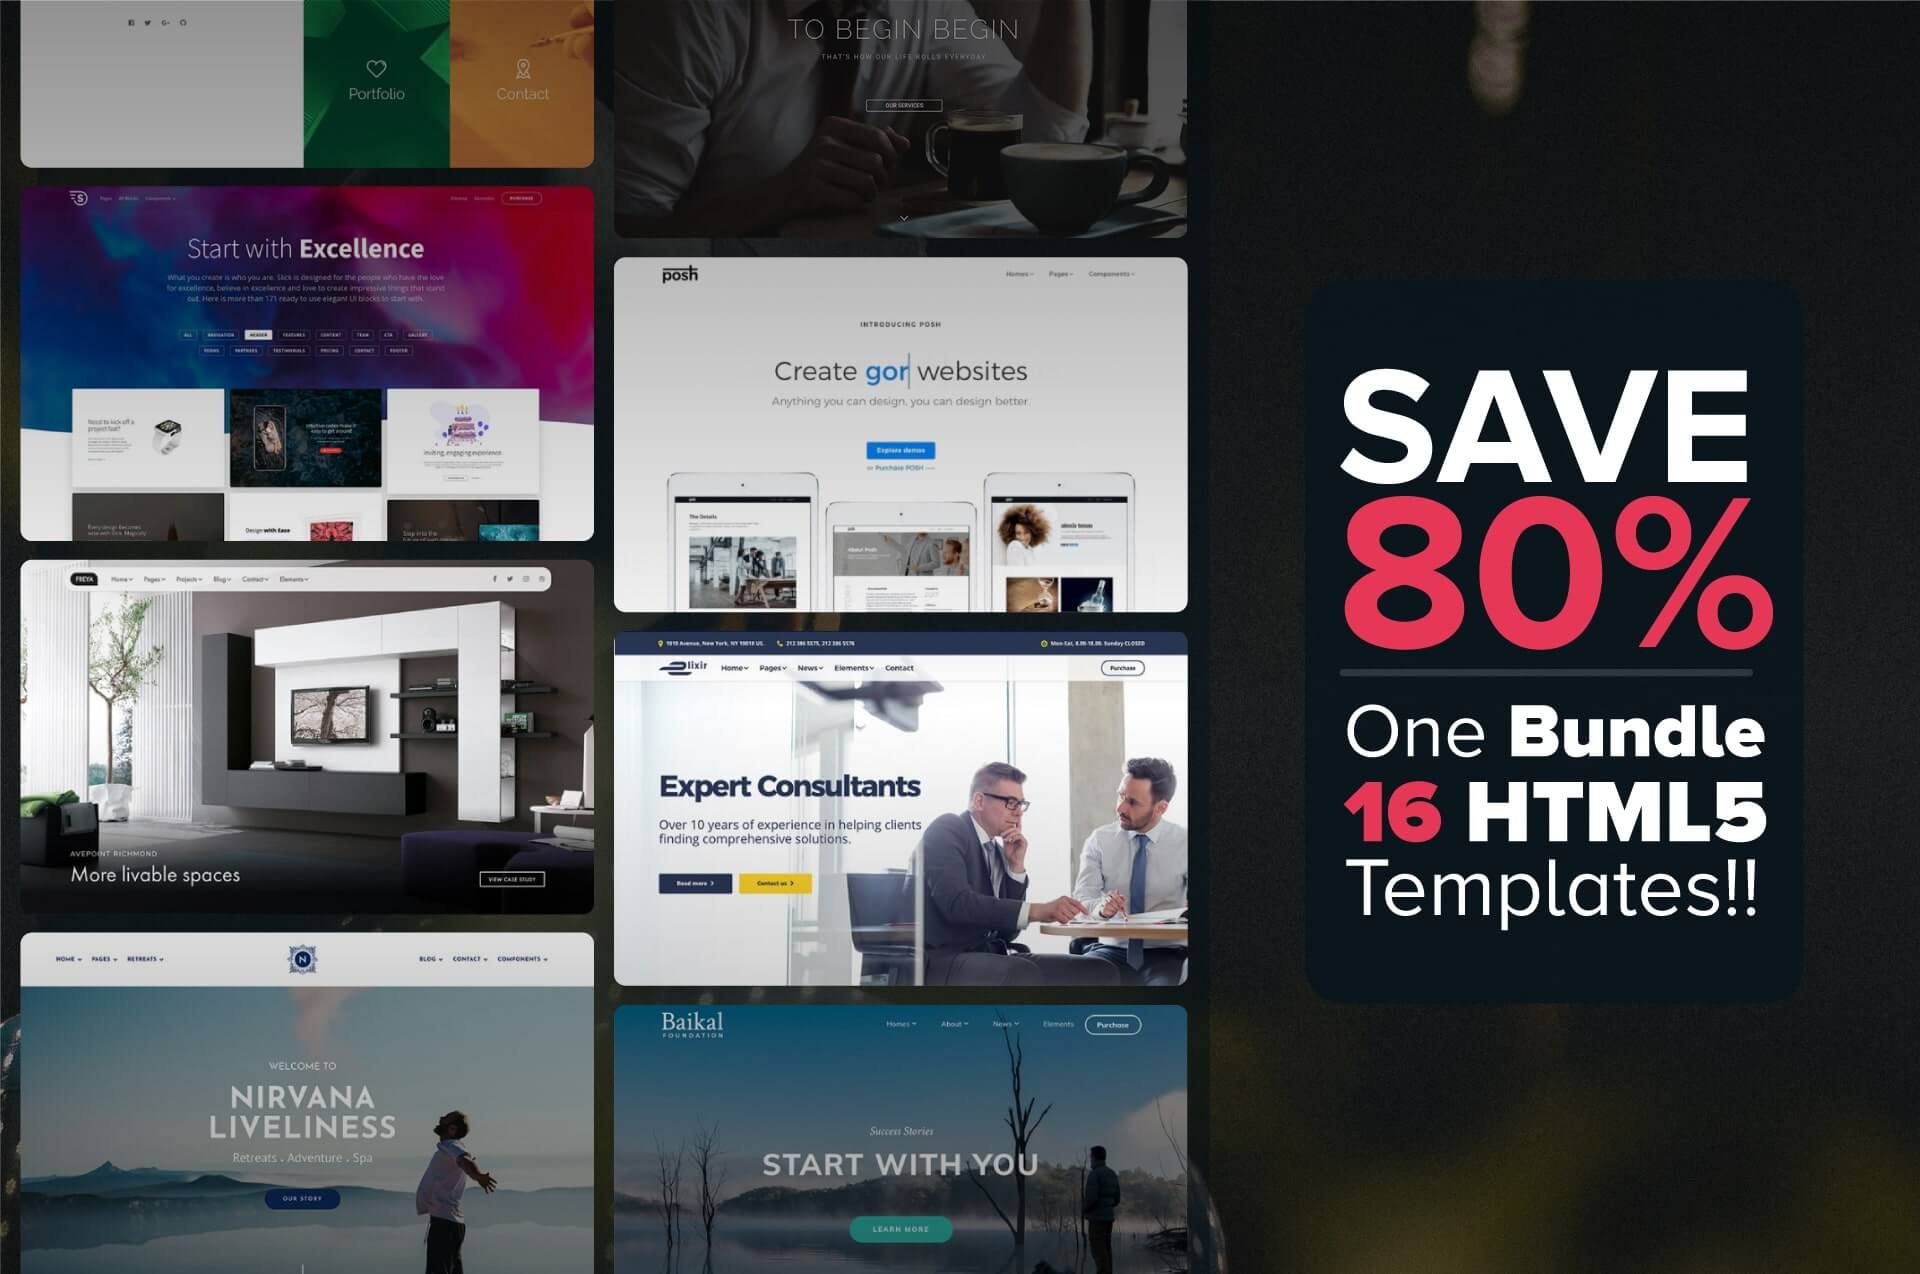 16 HTML5 Bootstrap Templates @80% OFF